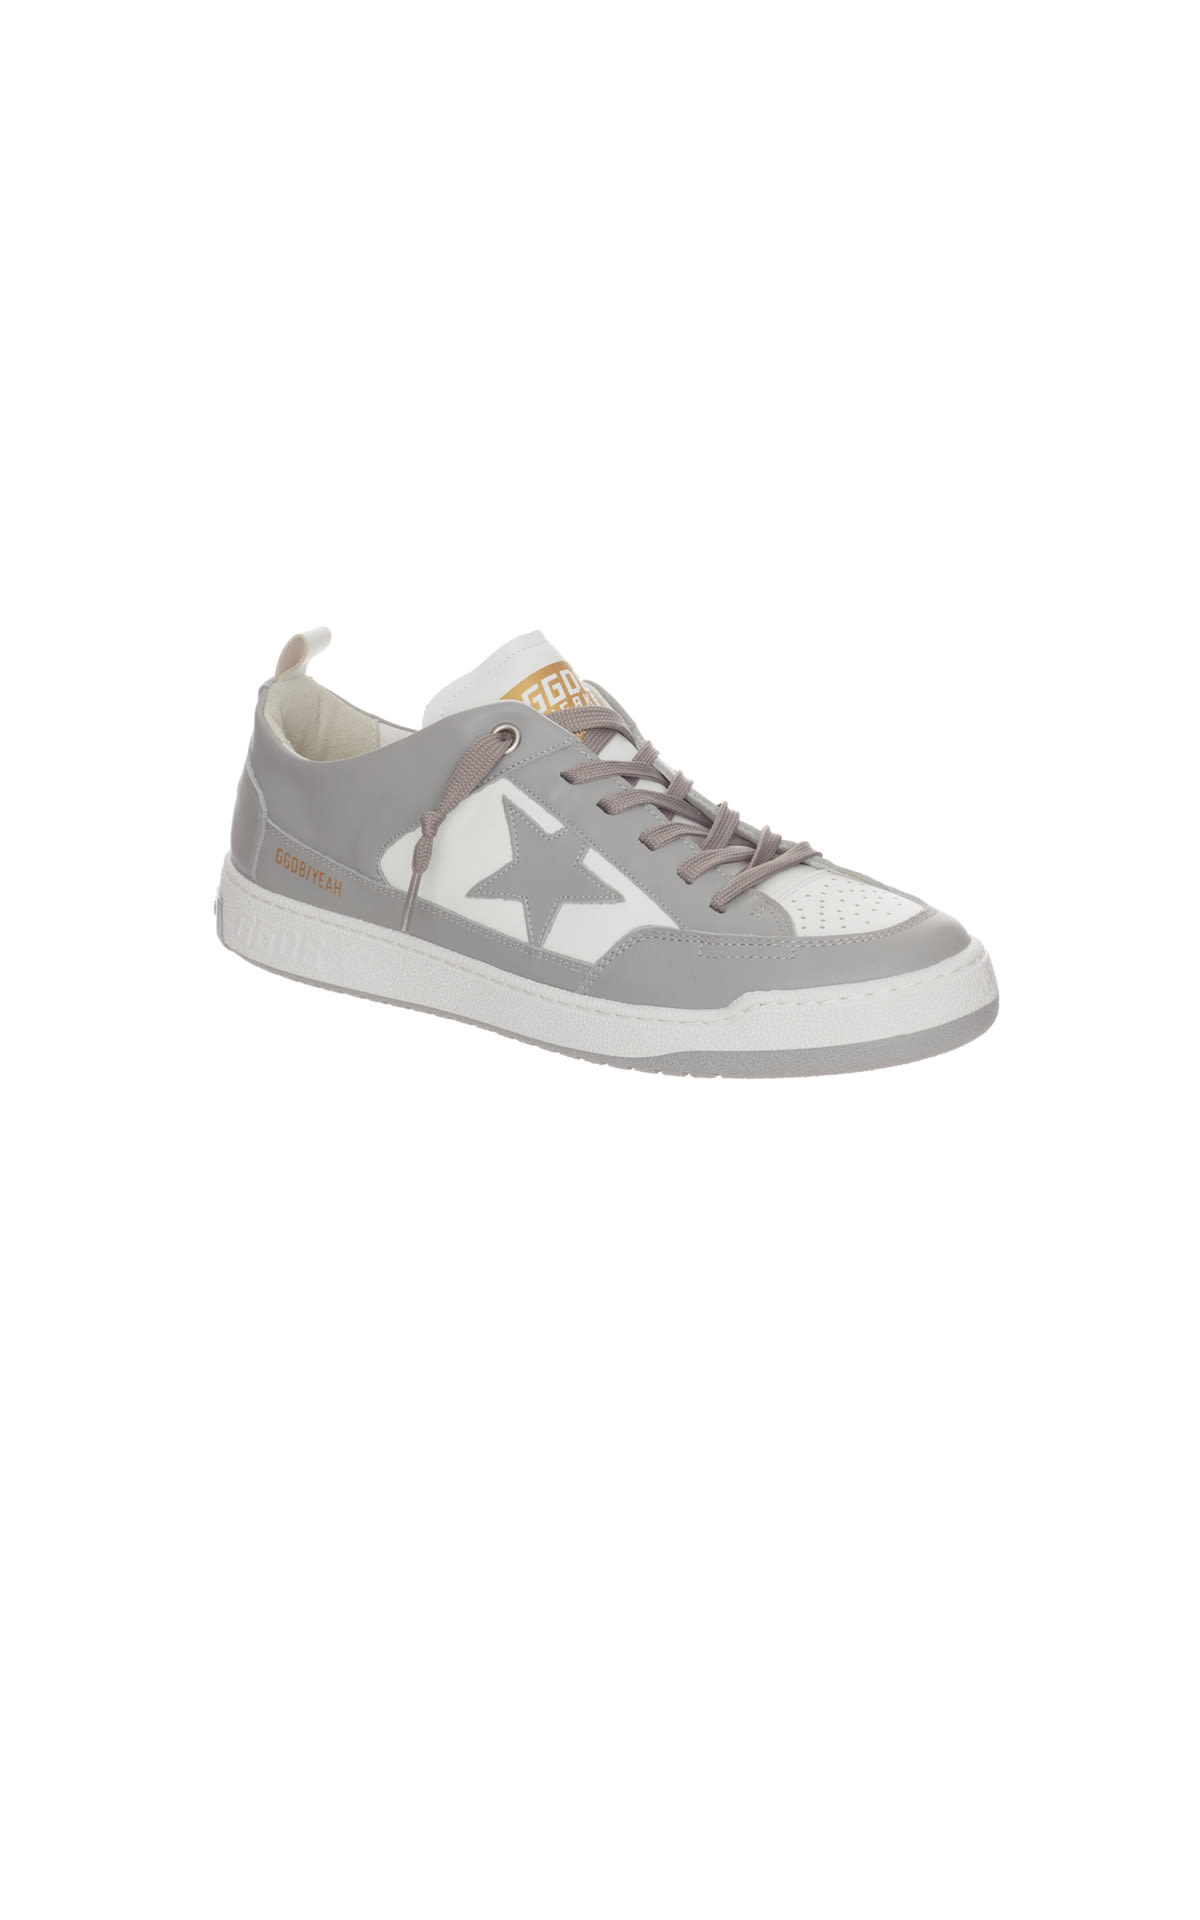 Golden Goose Mens sneakers from Bicester Village